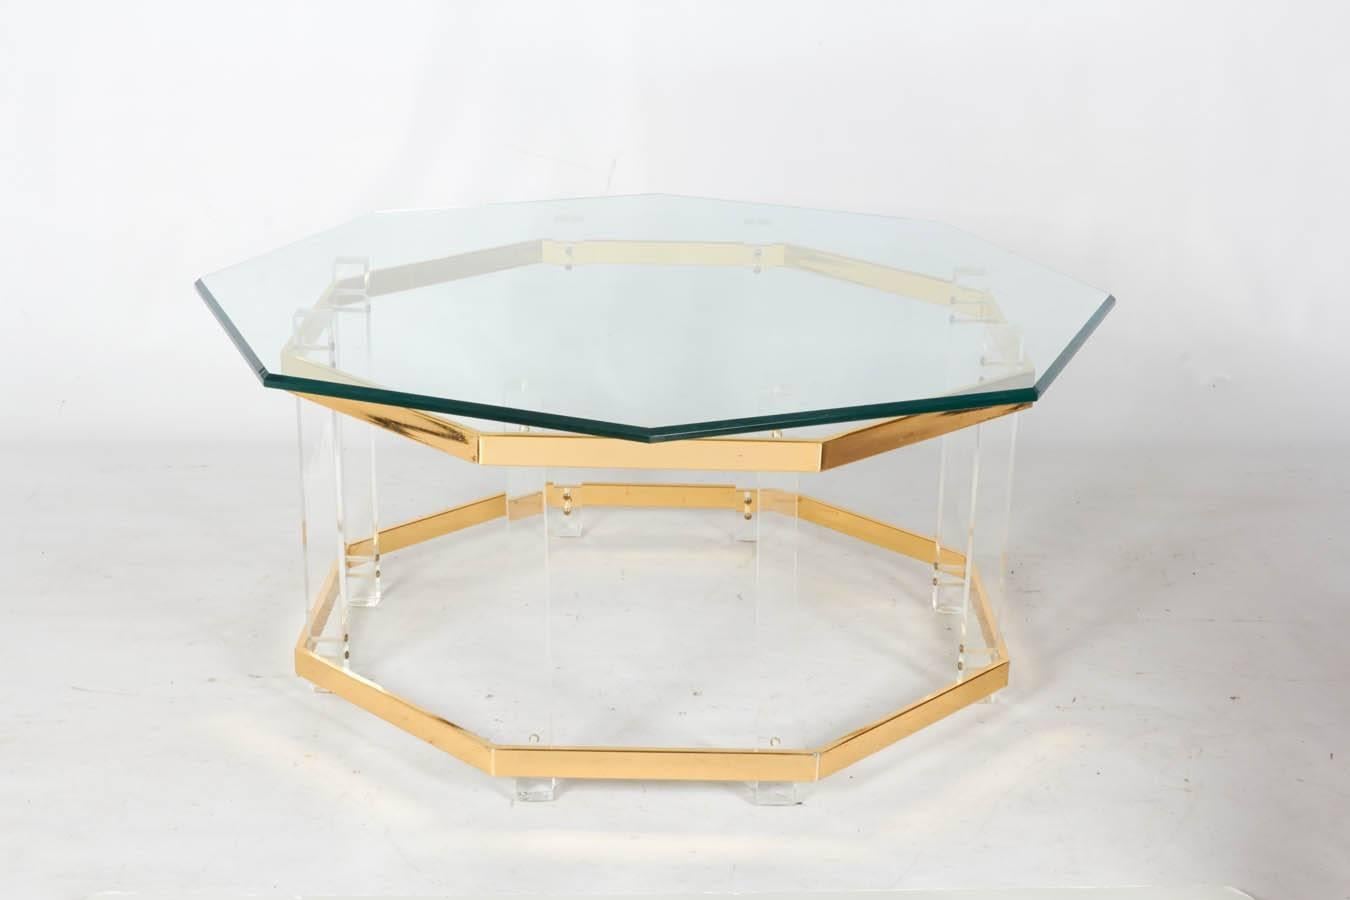 Octagonal coffee table with a beveled glass top over Lucite supports and brass trim. This version shows the glass shifted so that the points of the glass top are positioned over the middle of each panel below. Please contact for location. 